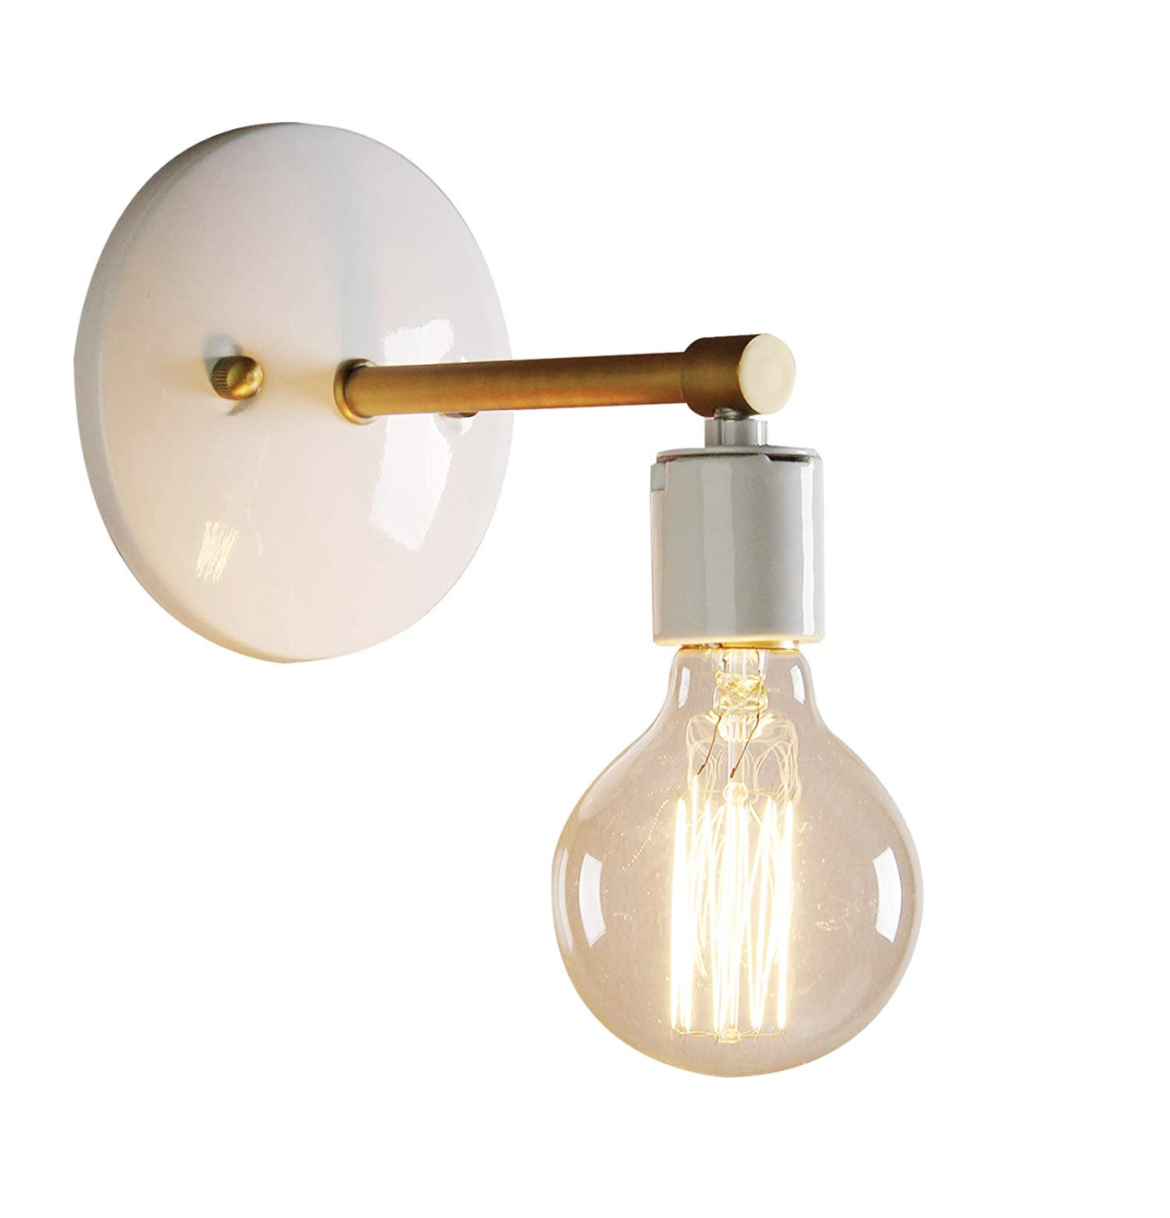 A BEAUTY OF A WALL SCONCE | 10 Underrated Amazon Products | www.lynneknowlton.com